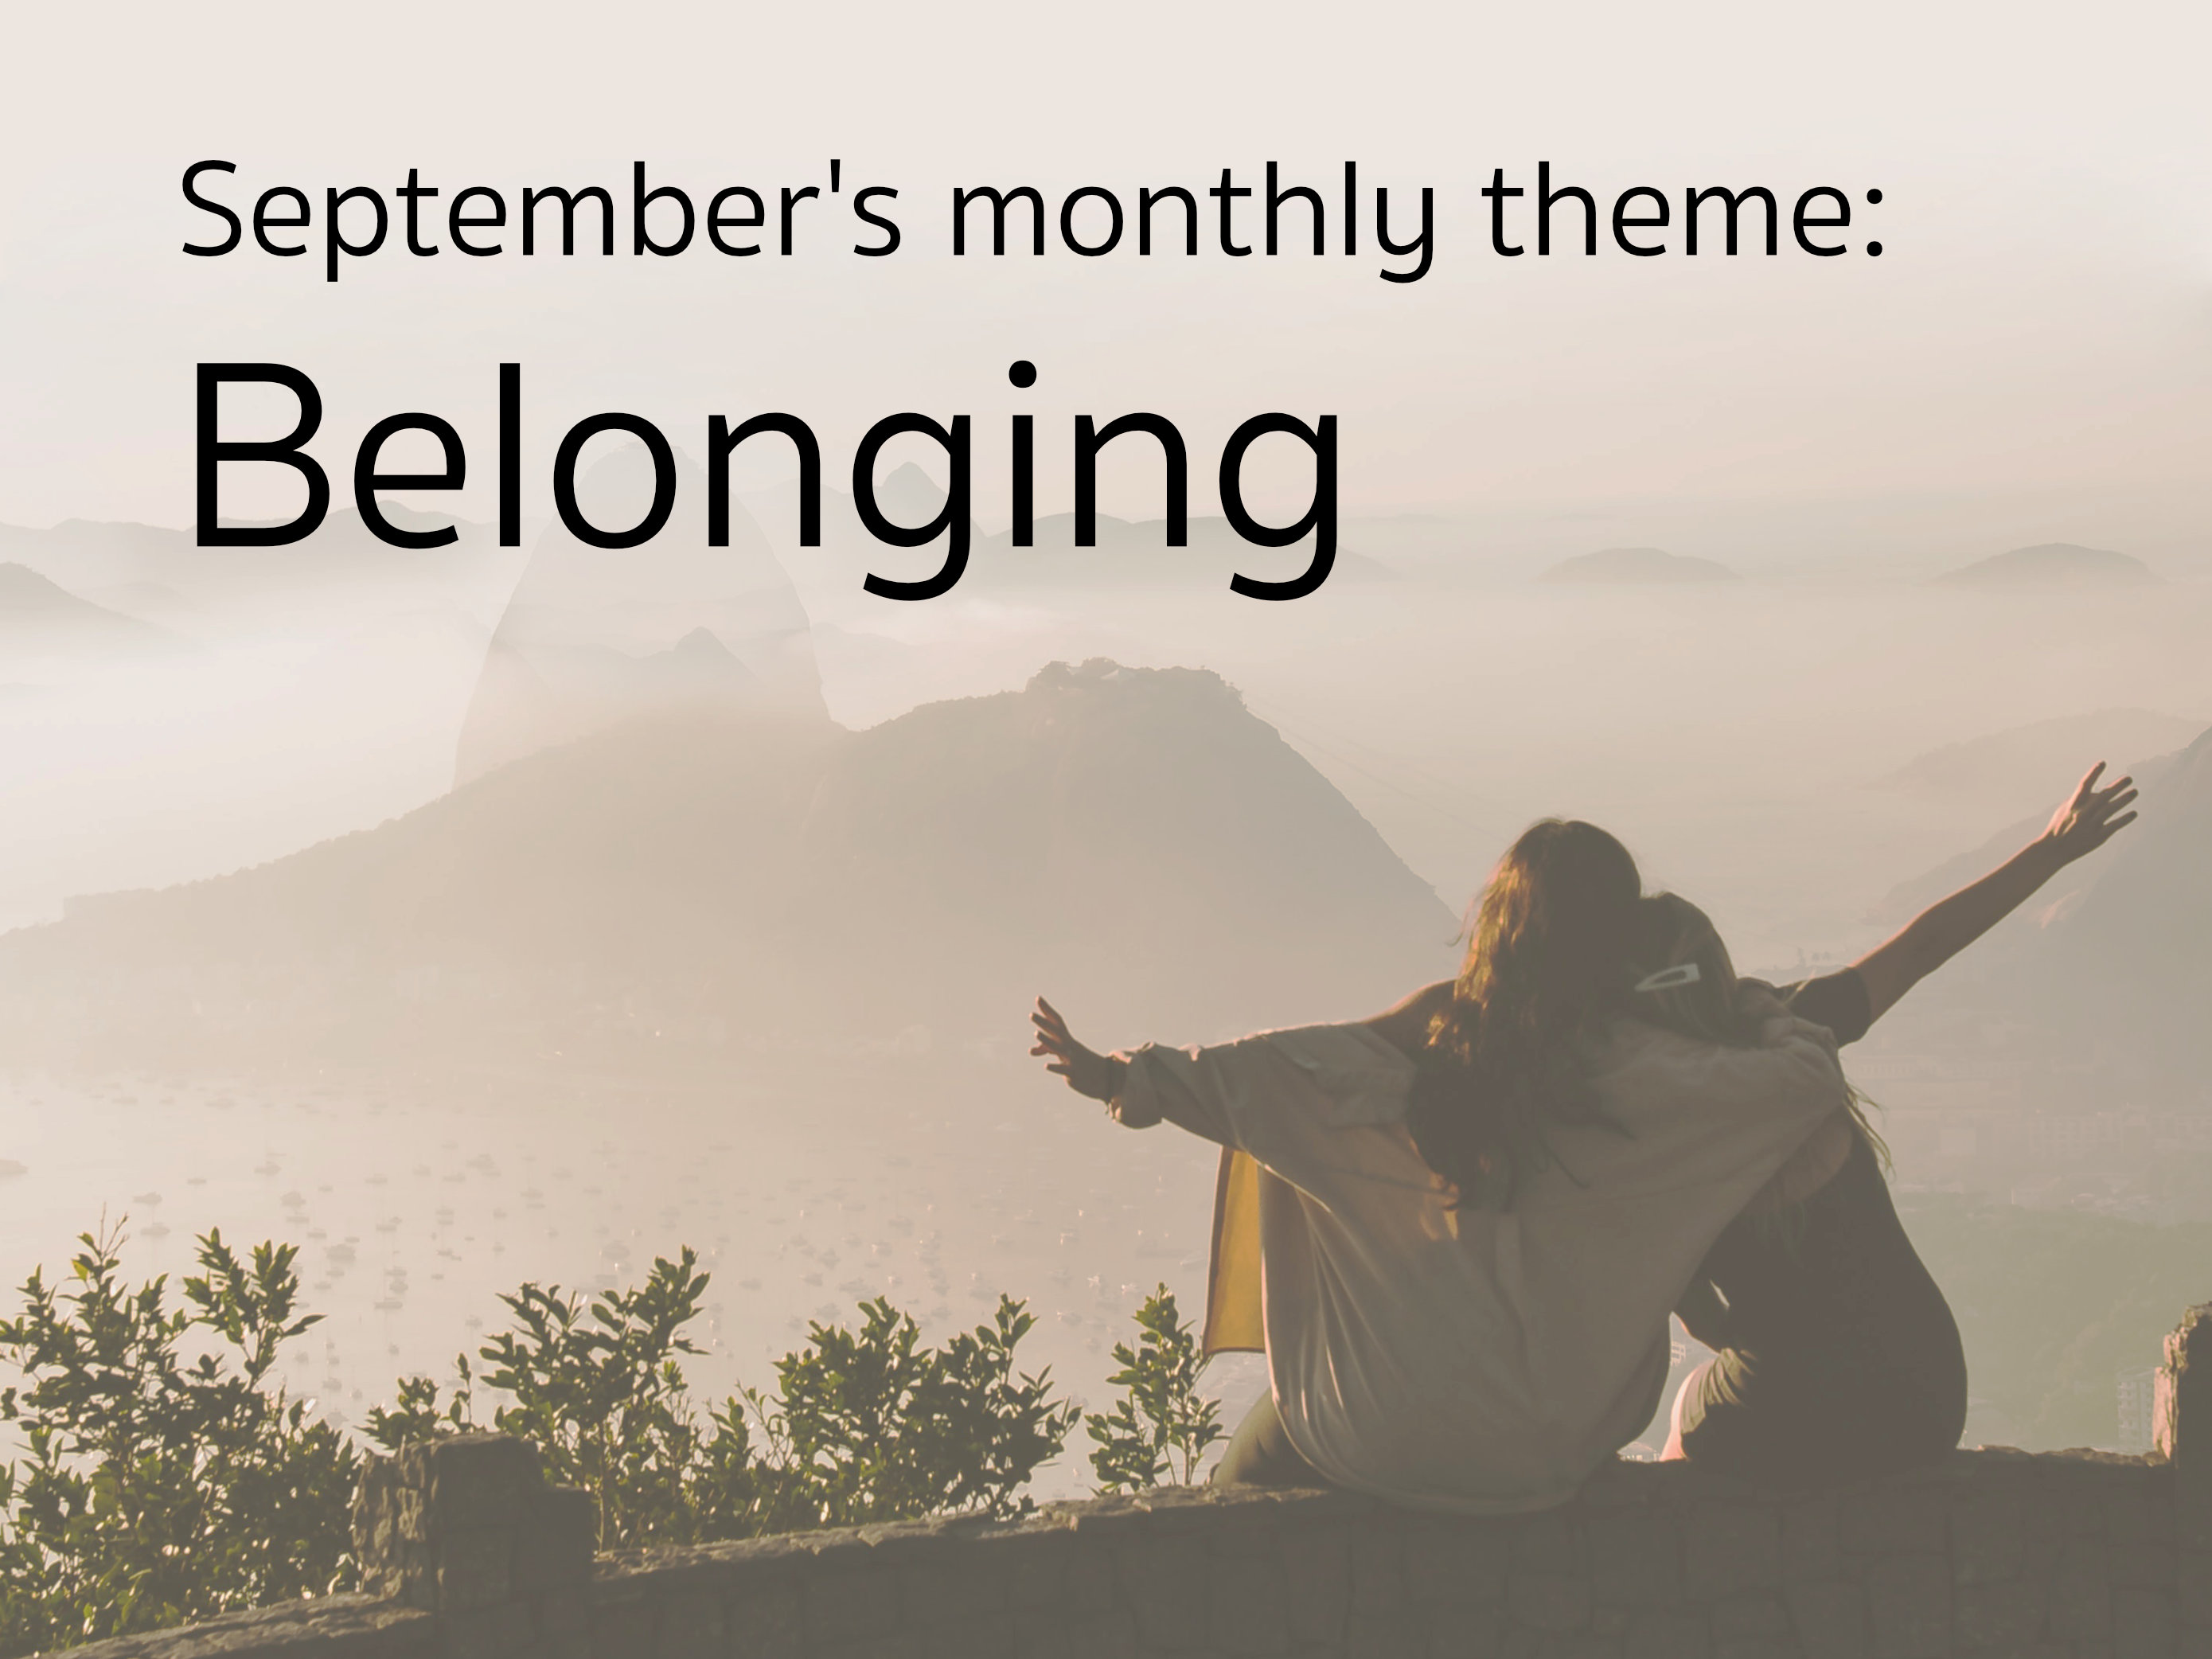 image of two people sitting together overlooking a foggy gorge. Text says September's monthly theme: Belonging